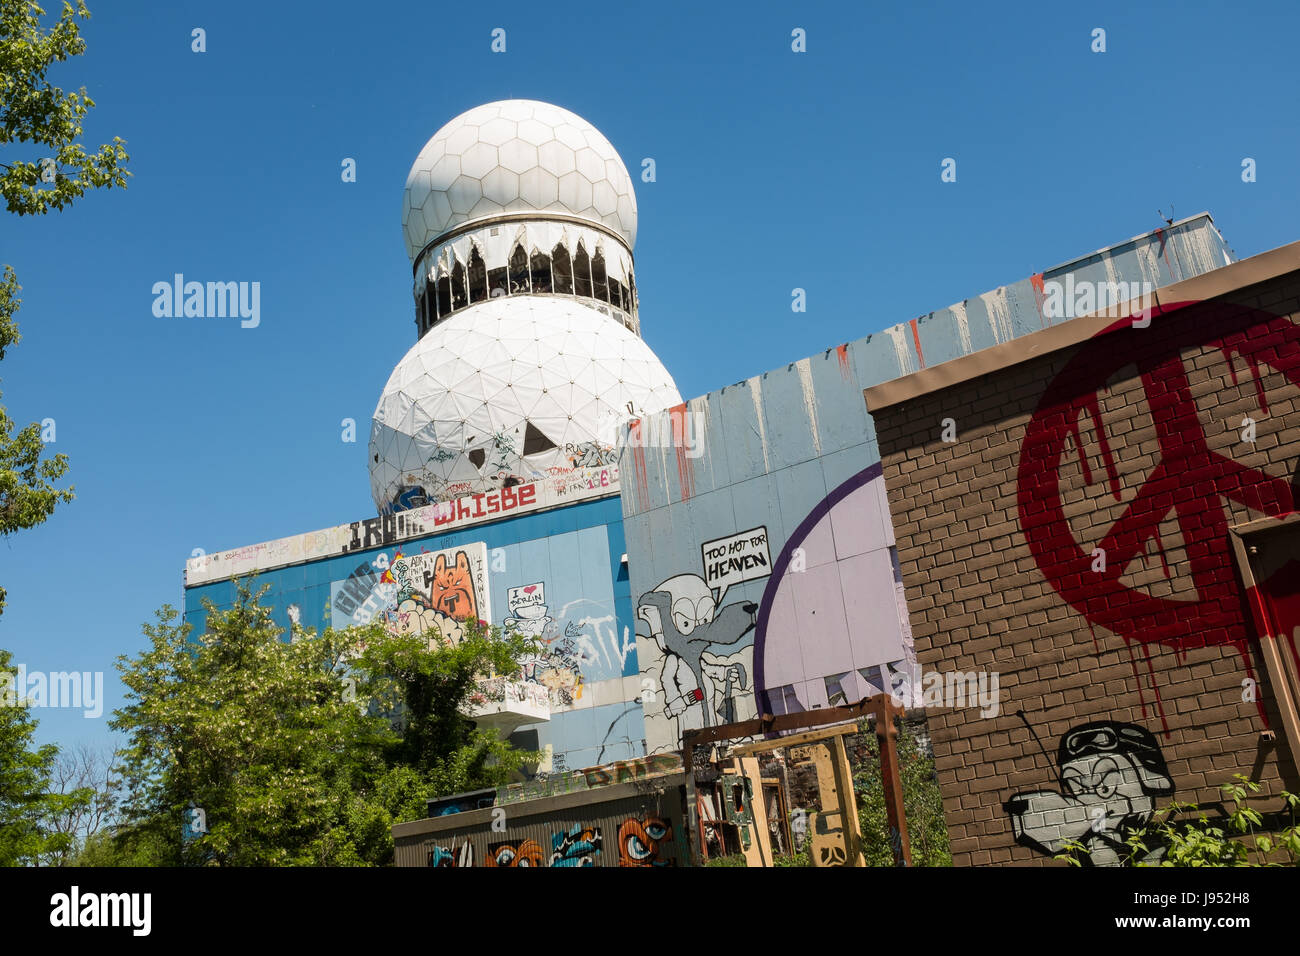 BERLIN, 27TH MAY: Former NSA US listening station on the top of the hill 'Teufelsberg' in Berlin on May 27th, 2017. Stock Photo